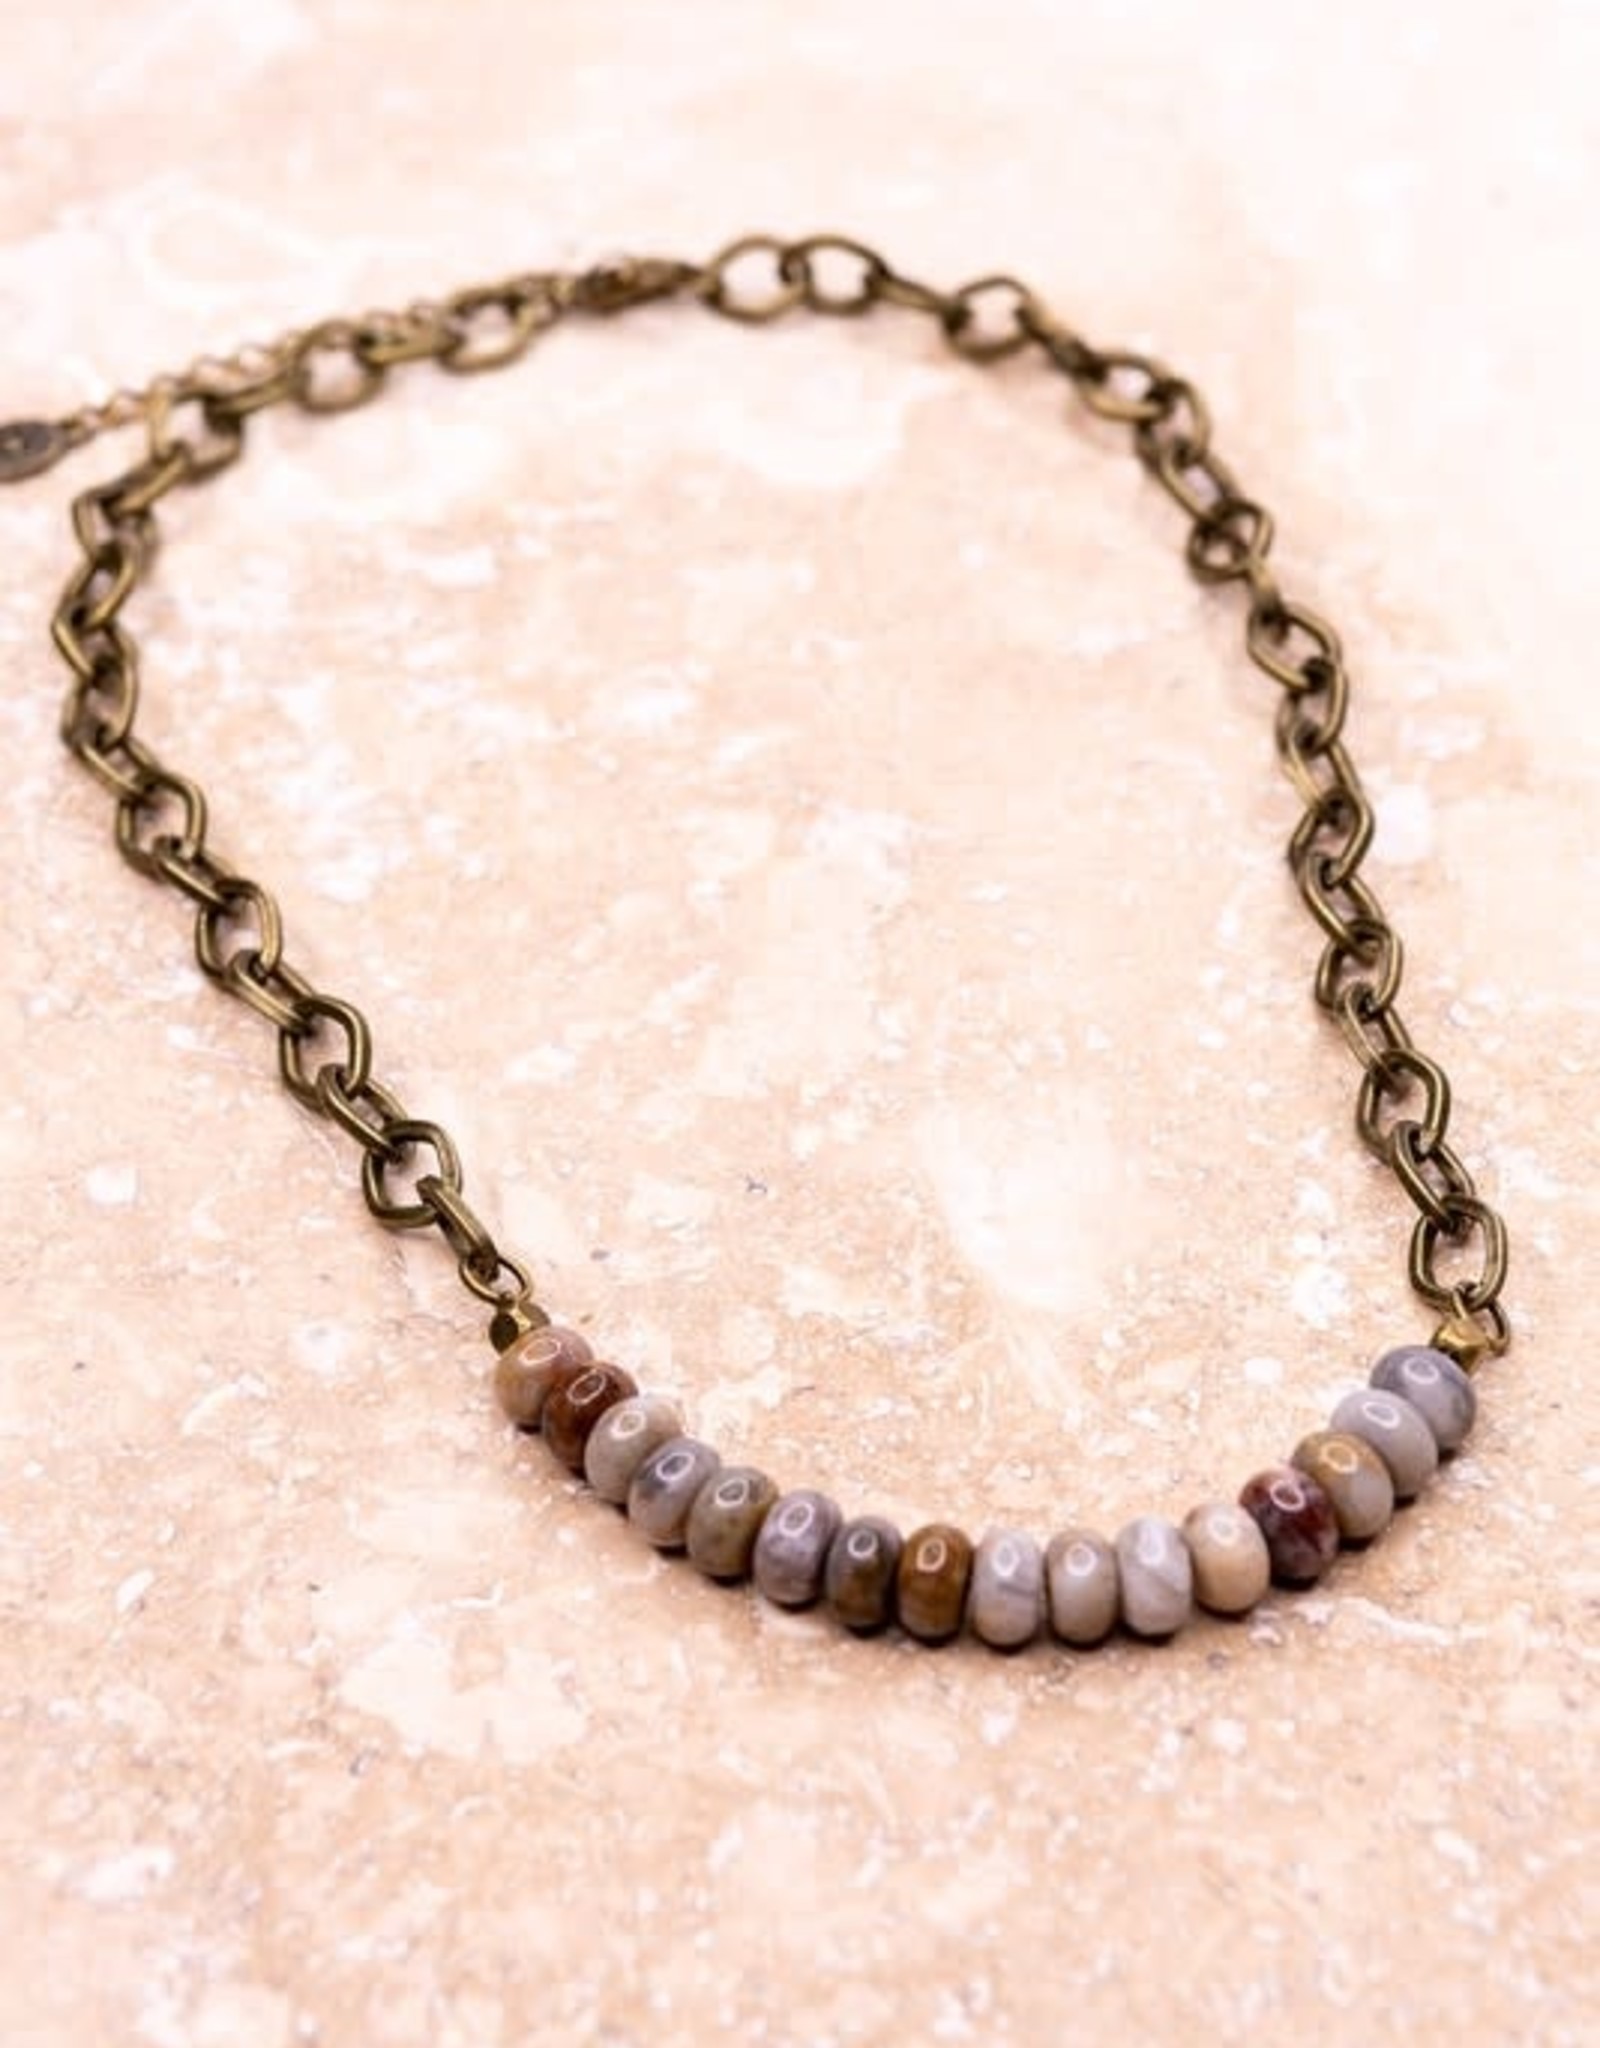 - Brass Link Short Bamboo Agate Necklace